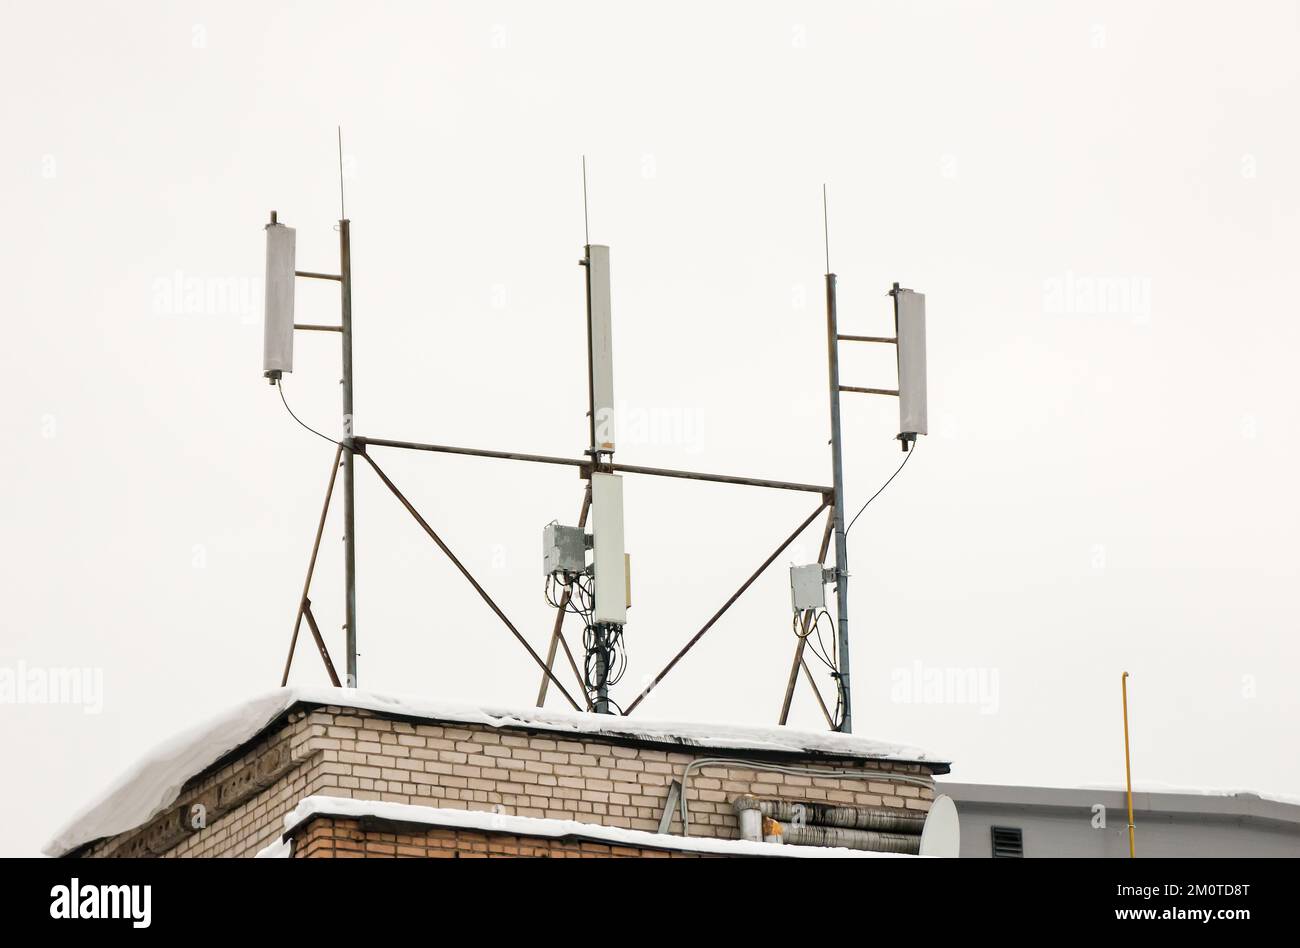 Several cellular antennas on the roof of the house provide communication. Snow lies on the milestone, against the background of a gray sky. Cloudy, cold winter day, soft light. Stock Photo